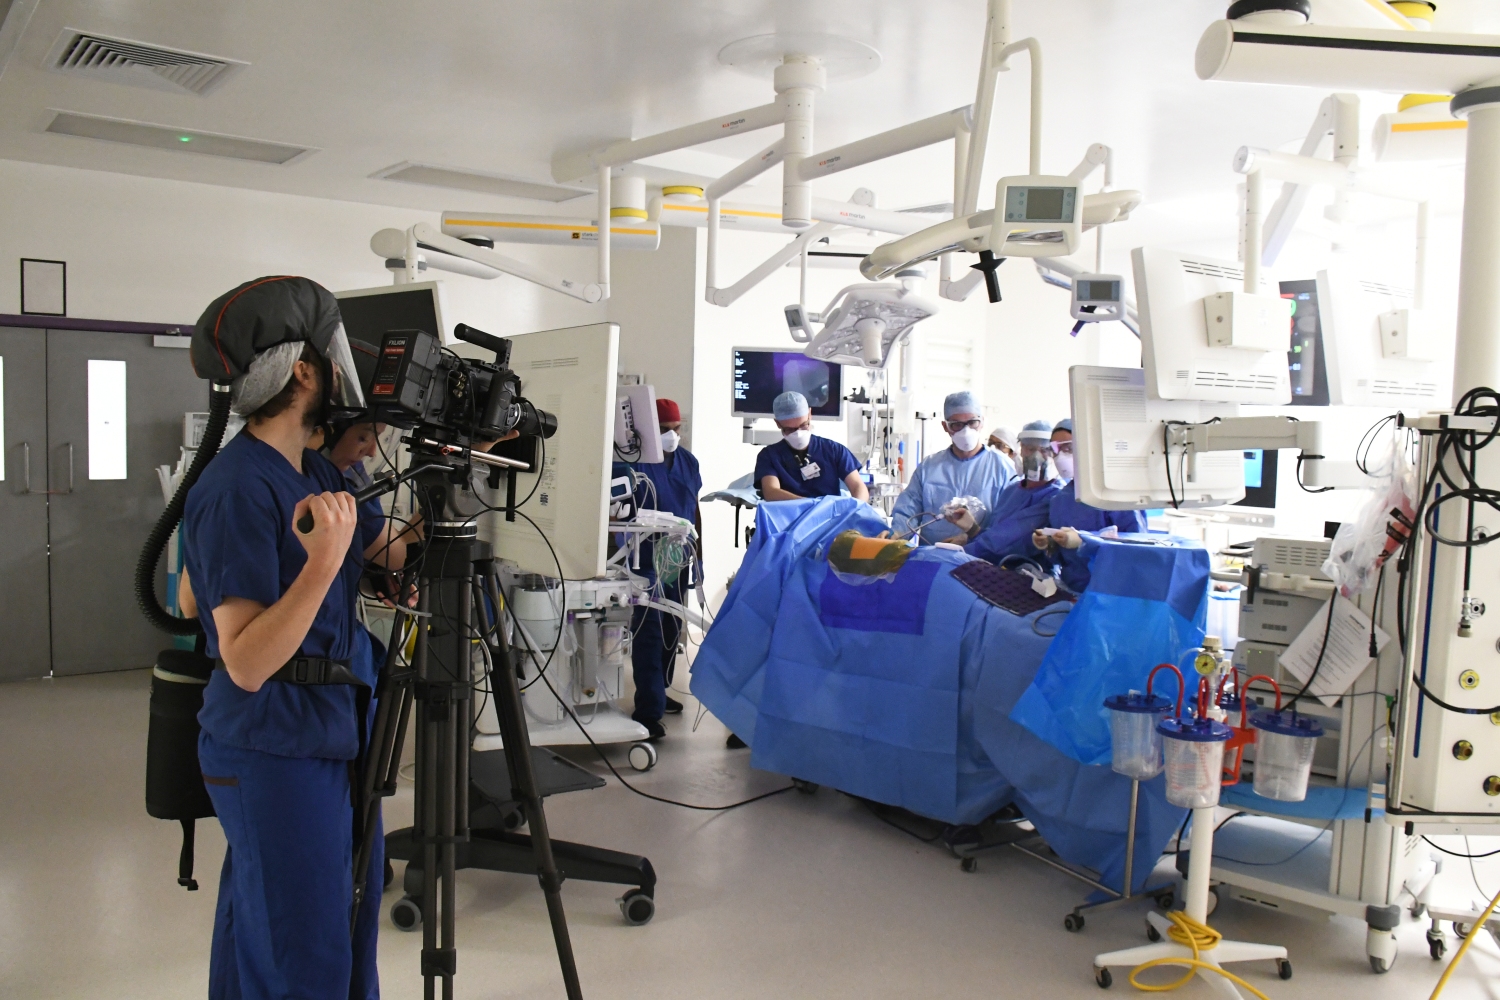 Two people with cameras and film kit stand in an operating theatre during surgery.